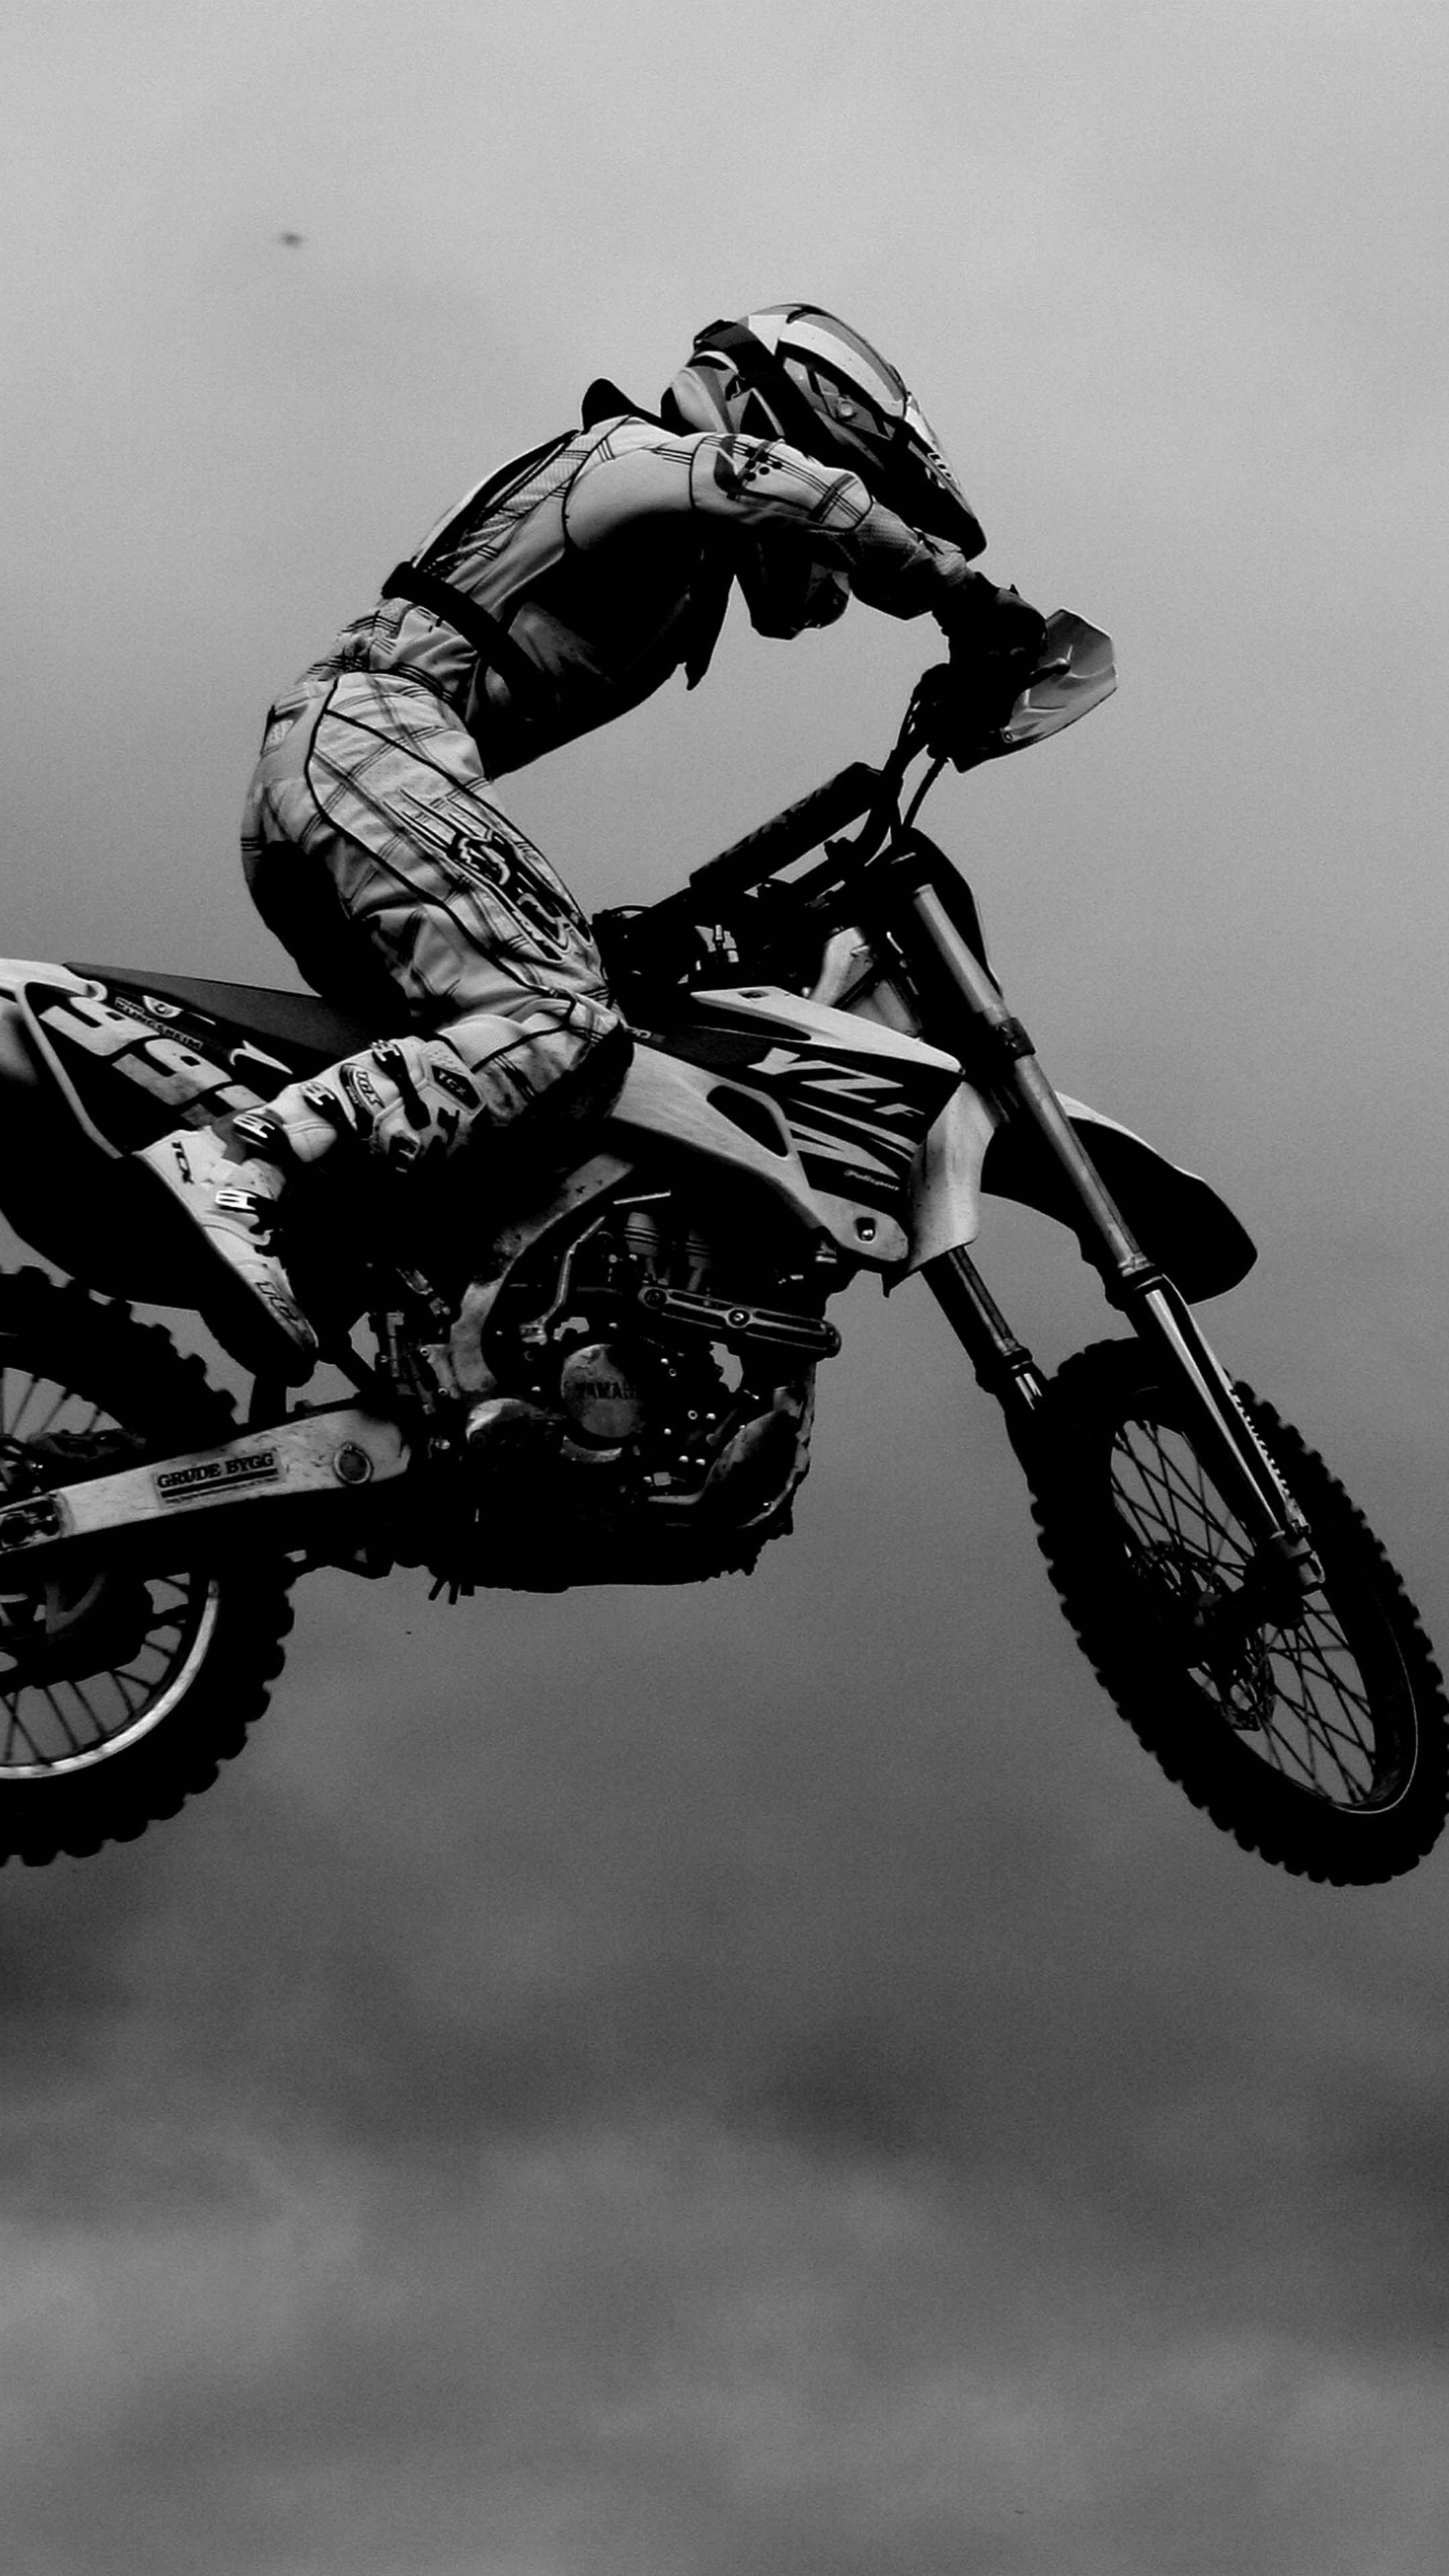 Motocross: Sportsman wears specialized protective suit and helmet, Black and white, Motorcyclist. 2160x3840 4K Background.